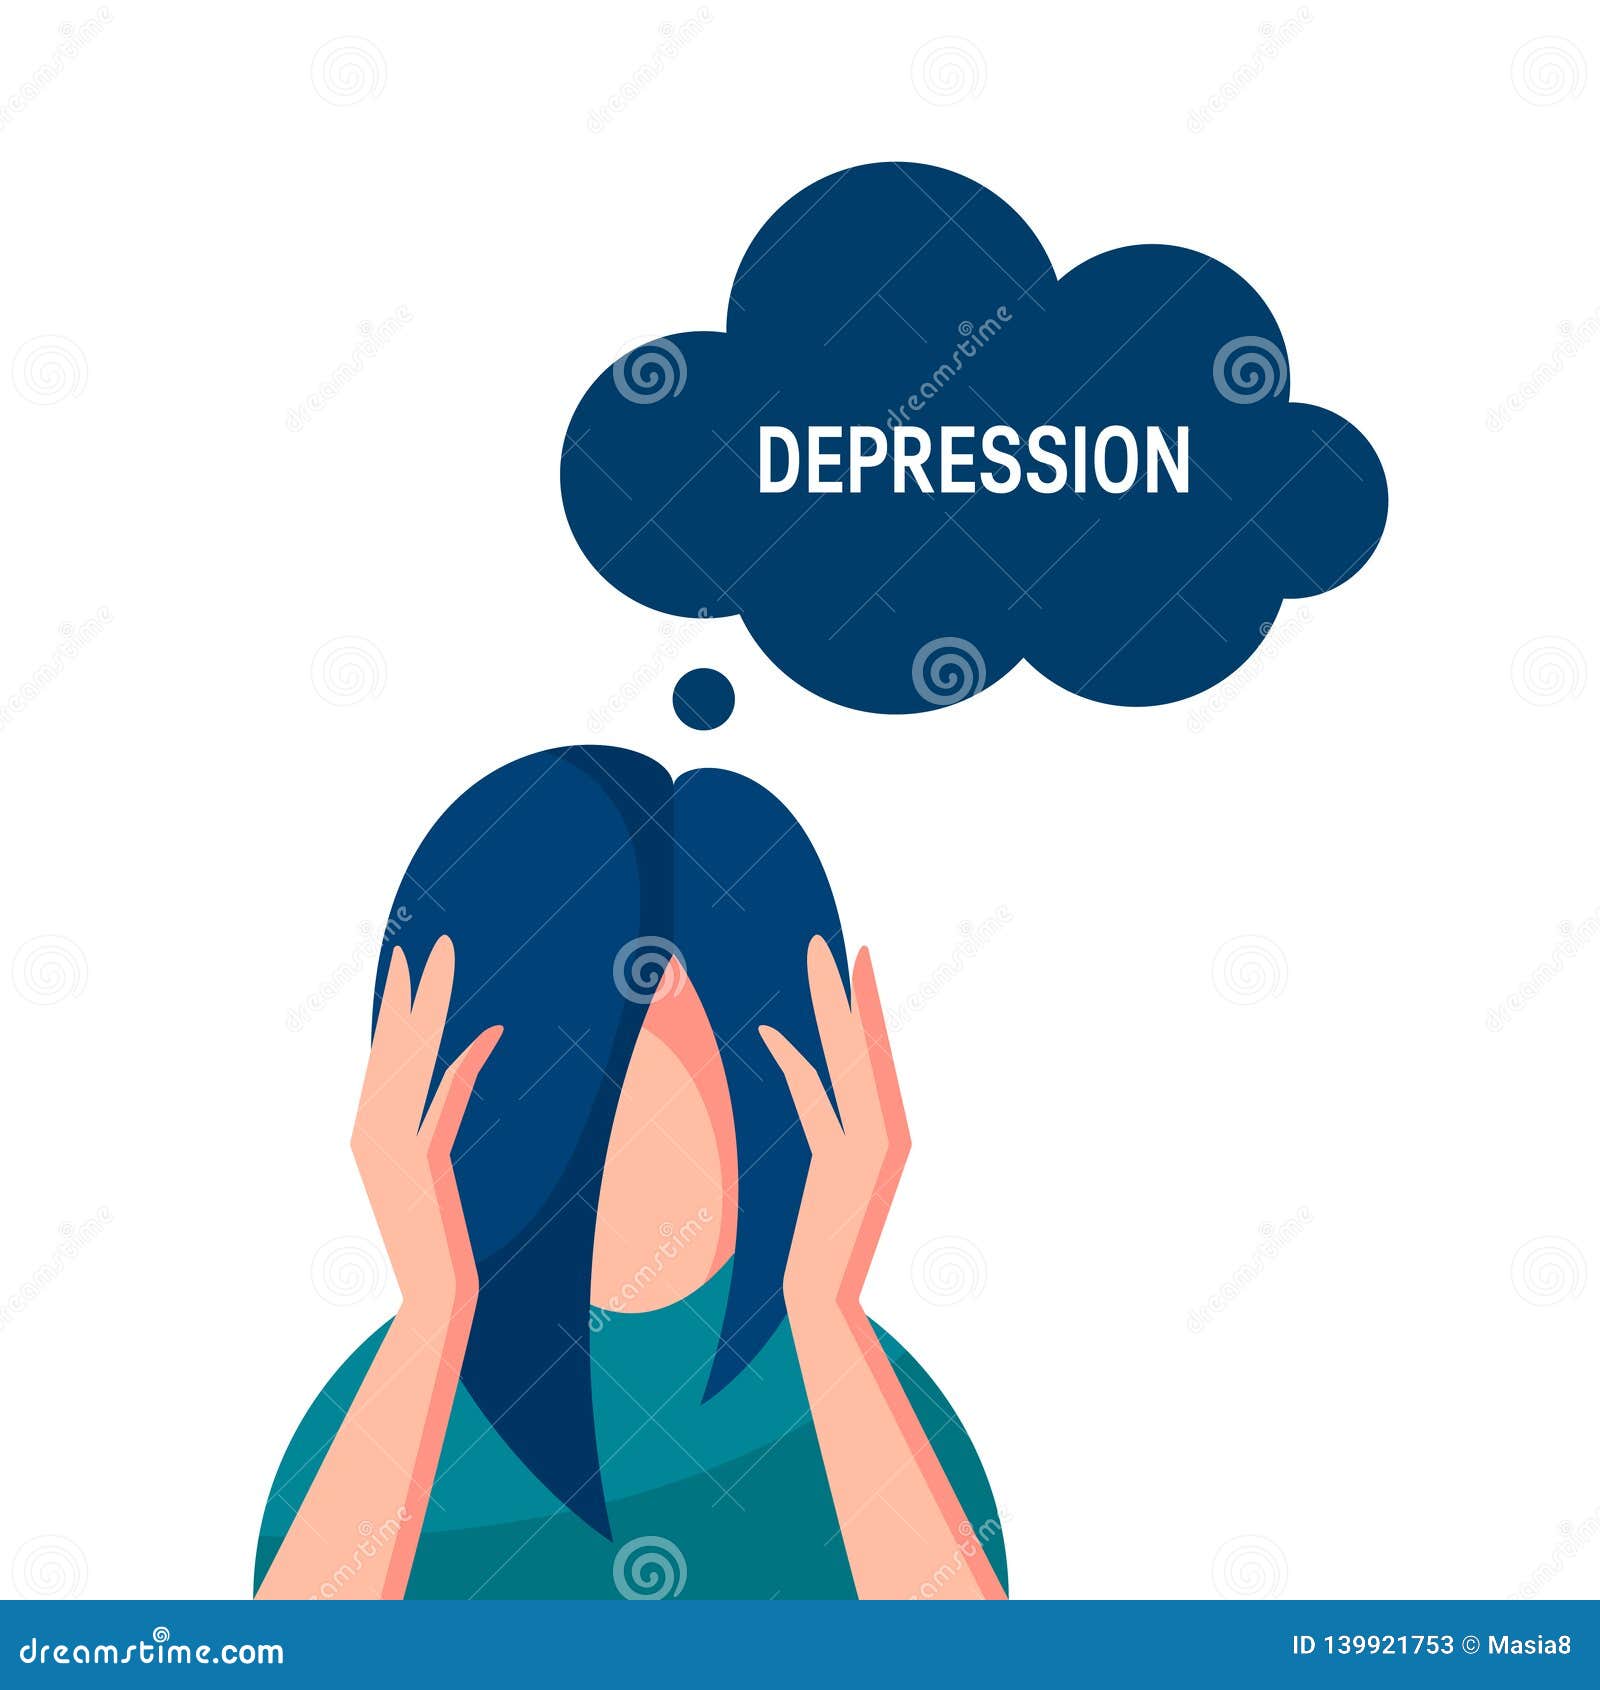 Depression Vector Concept in Simple Flat Style Stock Vector ...